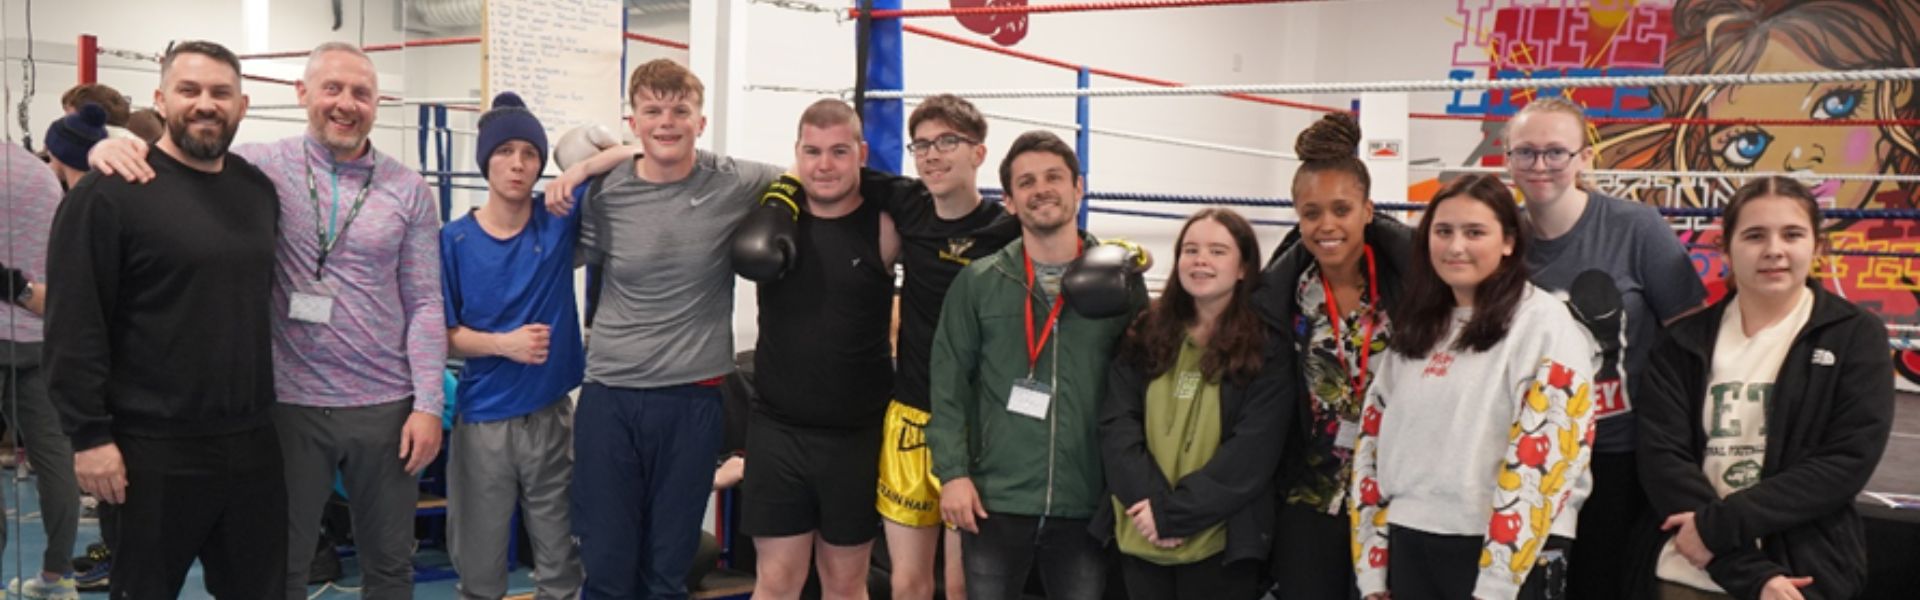 rganise Inspiring Boxing Meet and Greet Hosted at The Hive 